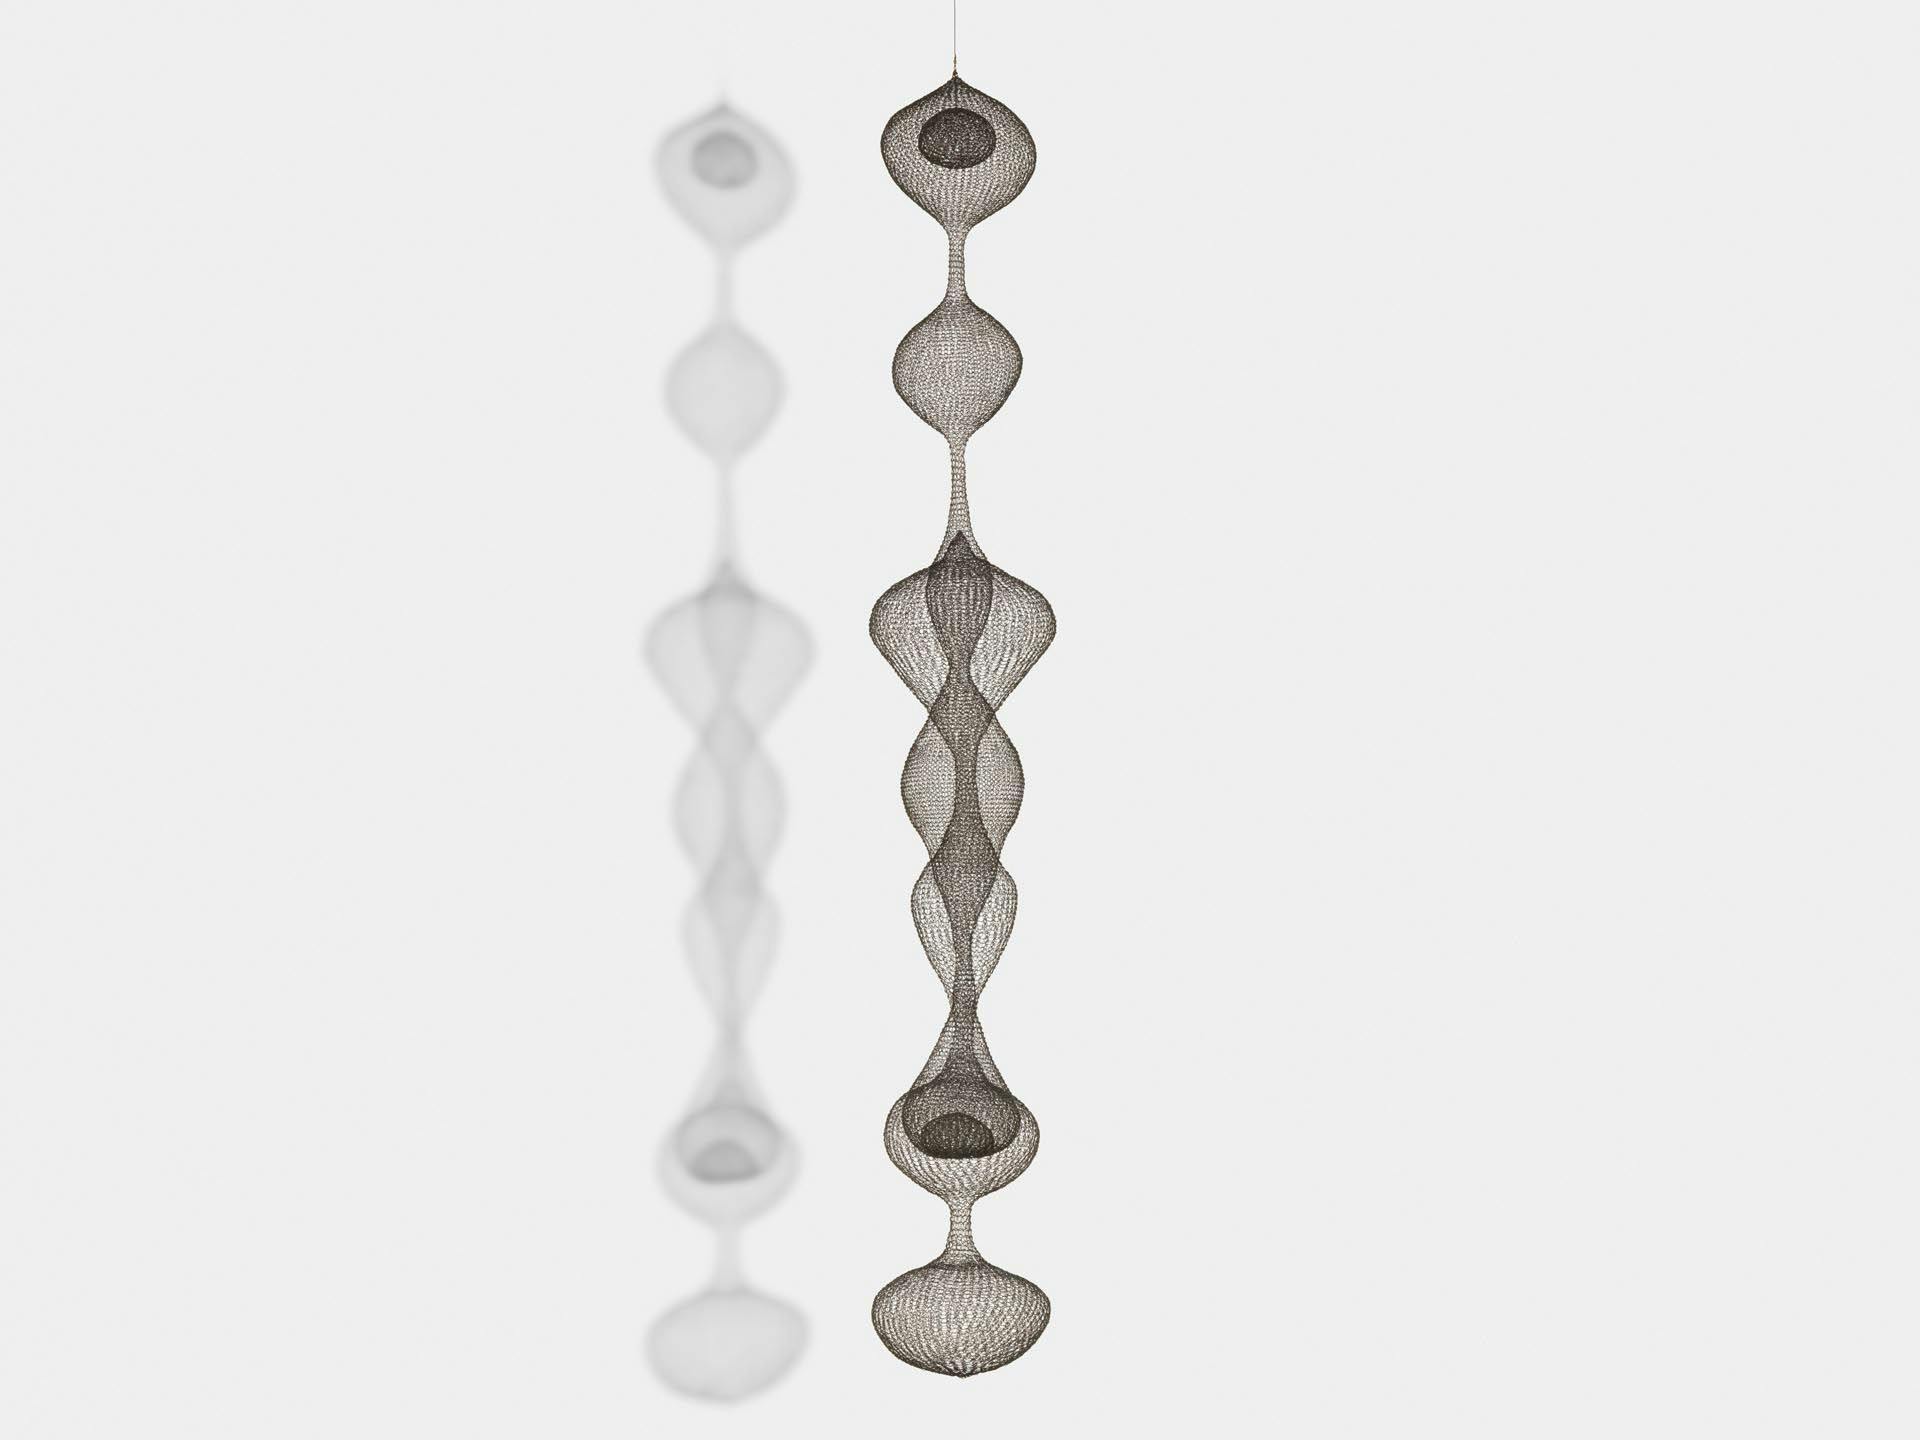 A sculpture by Ruth Asawa, titled Untitled (S.272, Hanging Seven-Lobed, Continuous Interwoven Form, with Spheres within Two Lobes), dated  circa 1954.